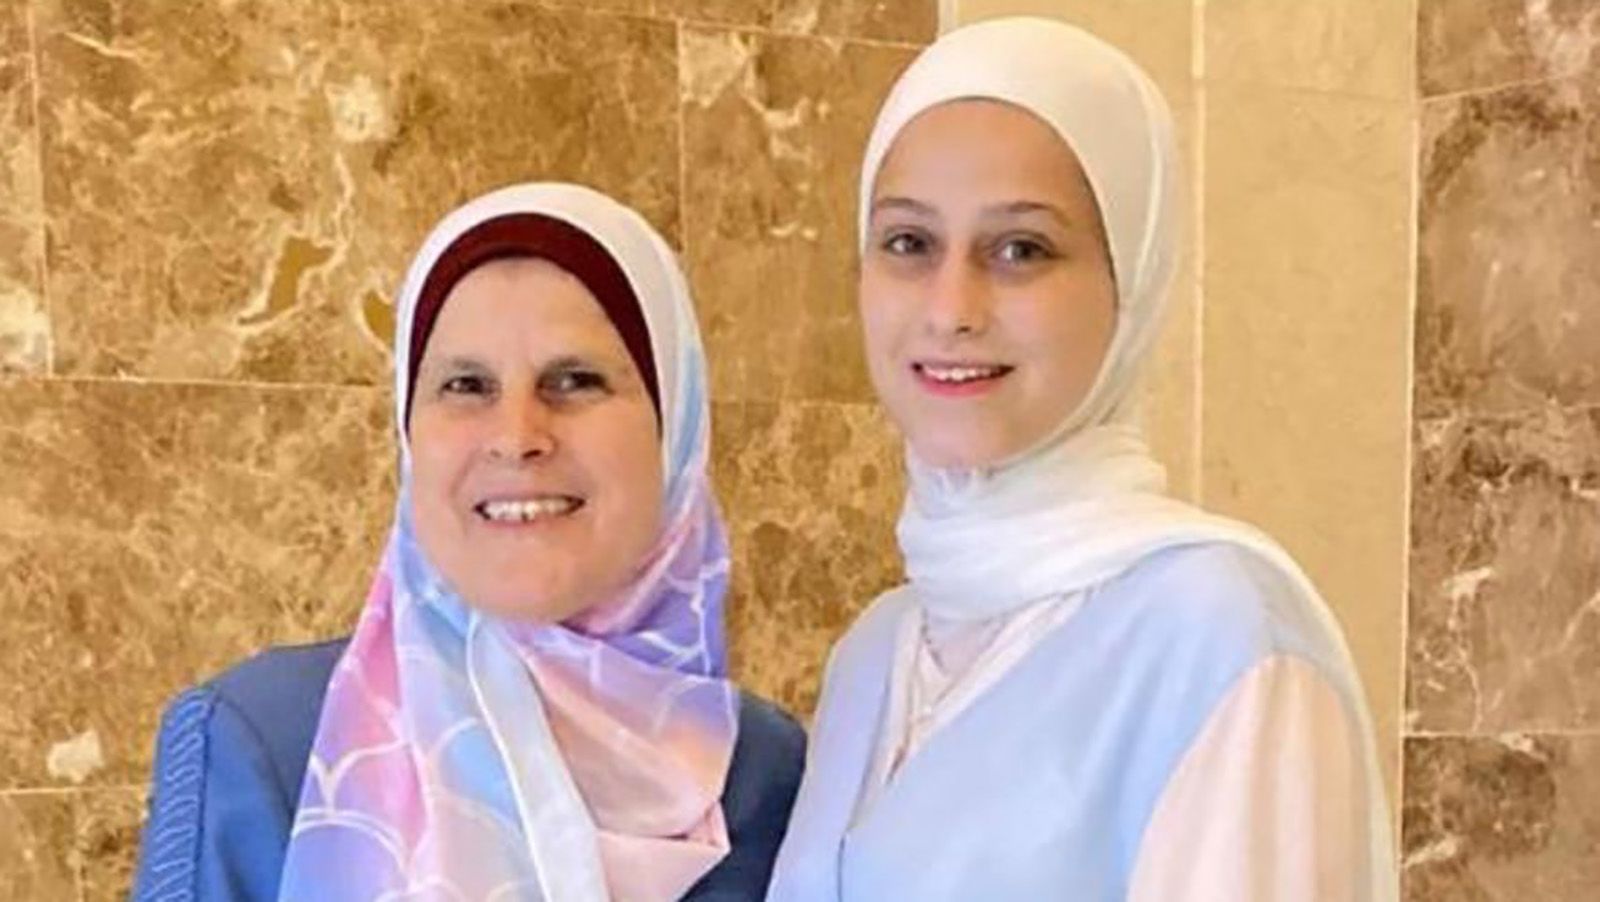 Sara with her mother, Hala. "My mother was all my life. My mother's life was dedicated to me and my siblings and my father. To her grandchildren, she was the loving 'Teta,'" Sara said.